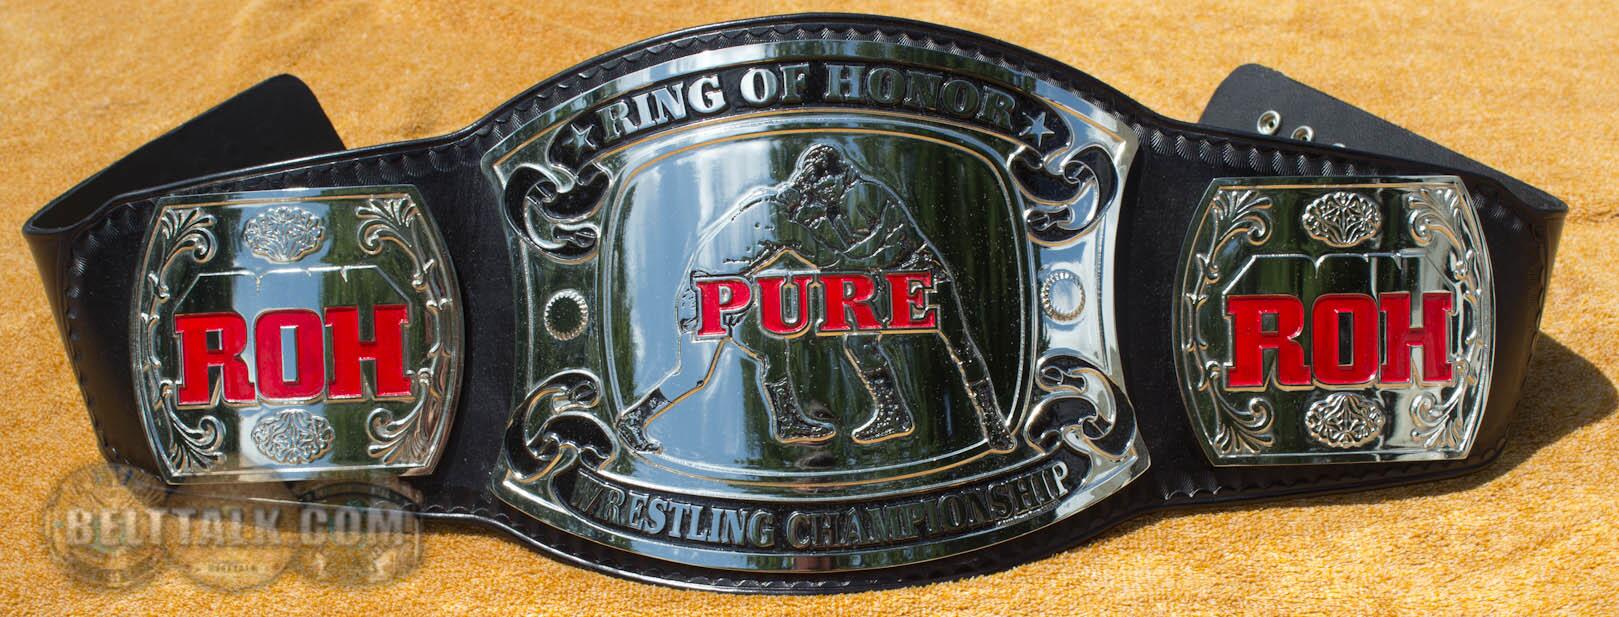 Pure Title Tournament Begins Airing Sept 12, 2020